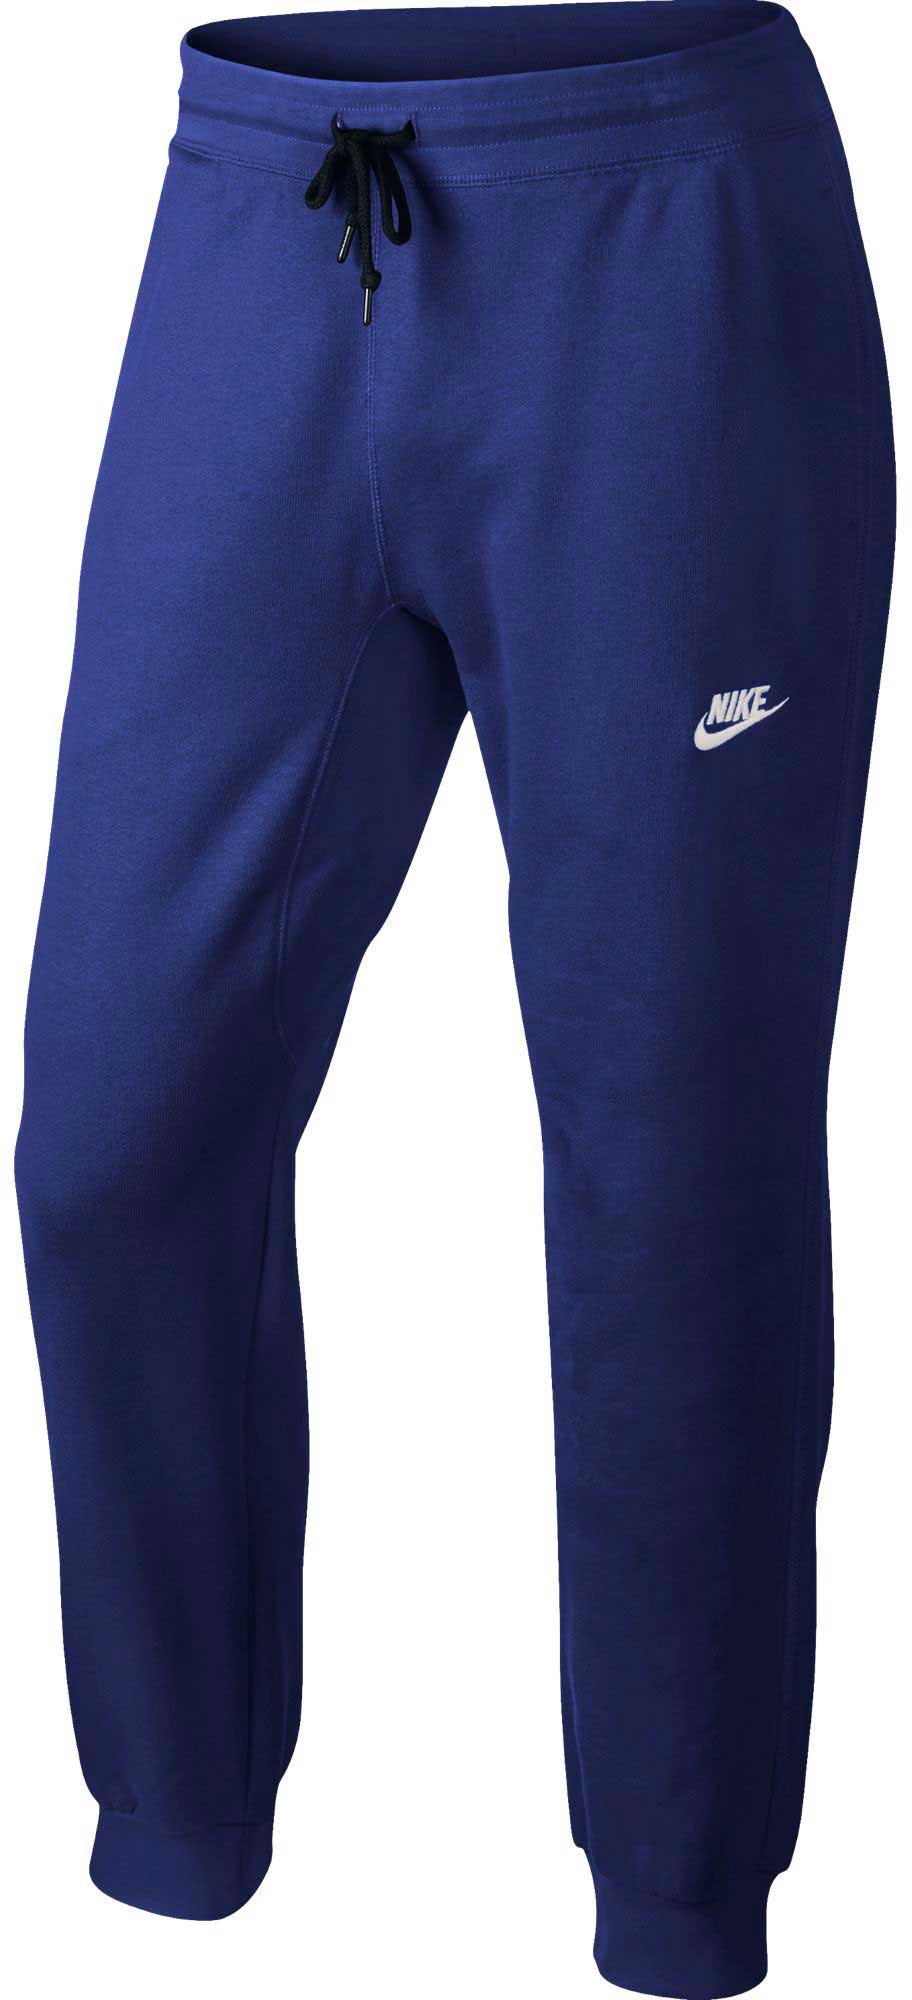 AW77 FT CUFF PANT - Men's tracksuit